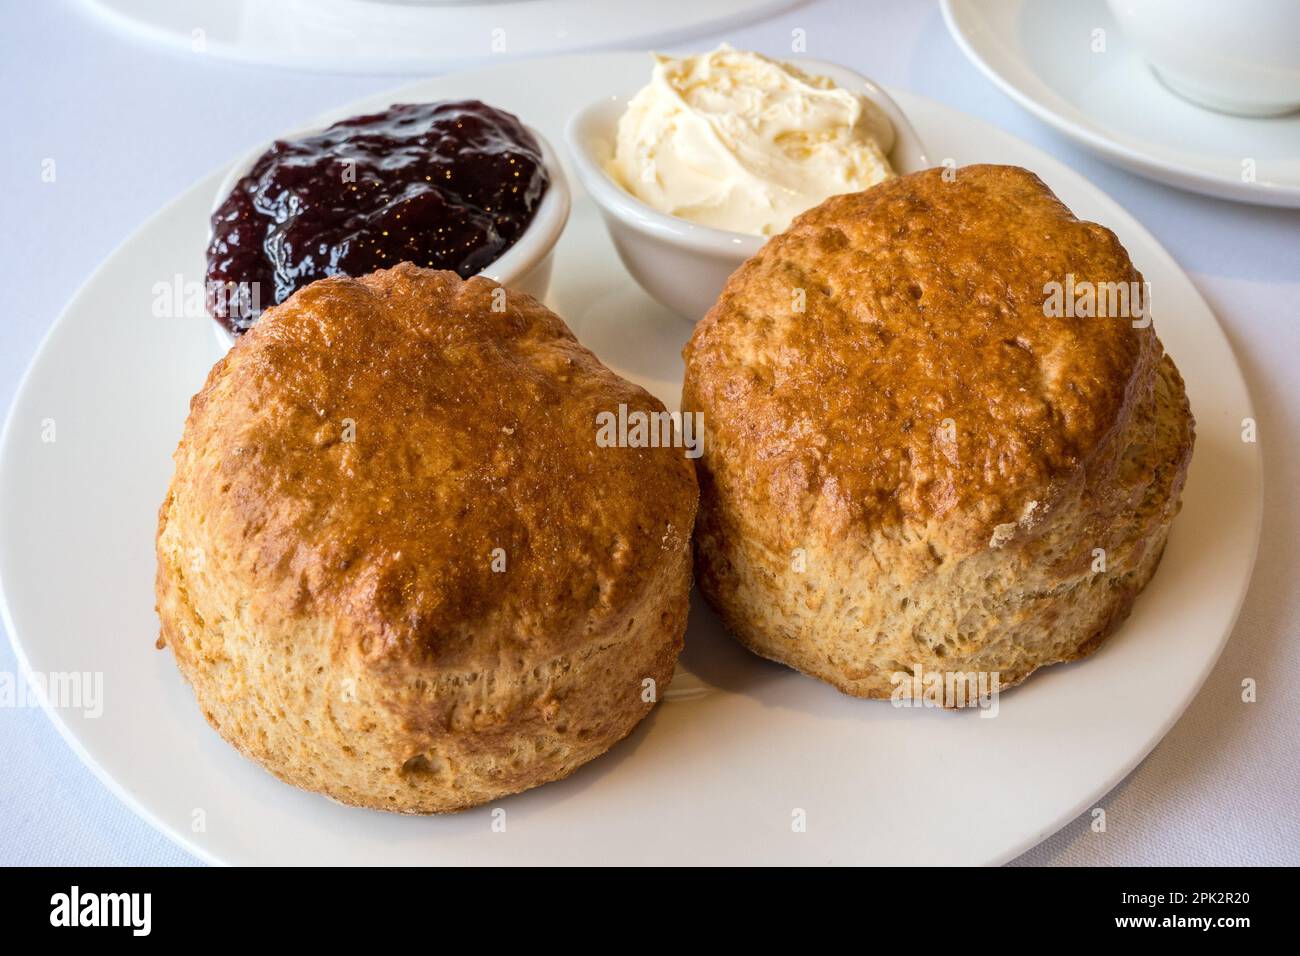 Cream tea with two freshly baked plain scones with small dishes of clotted cream and strawberry jam on a clean white plate and tablecloth, England, UK Stock Photo